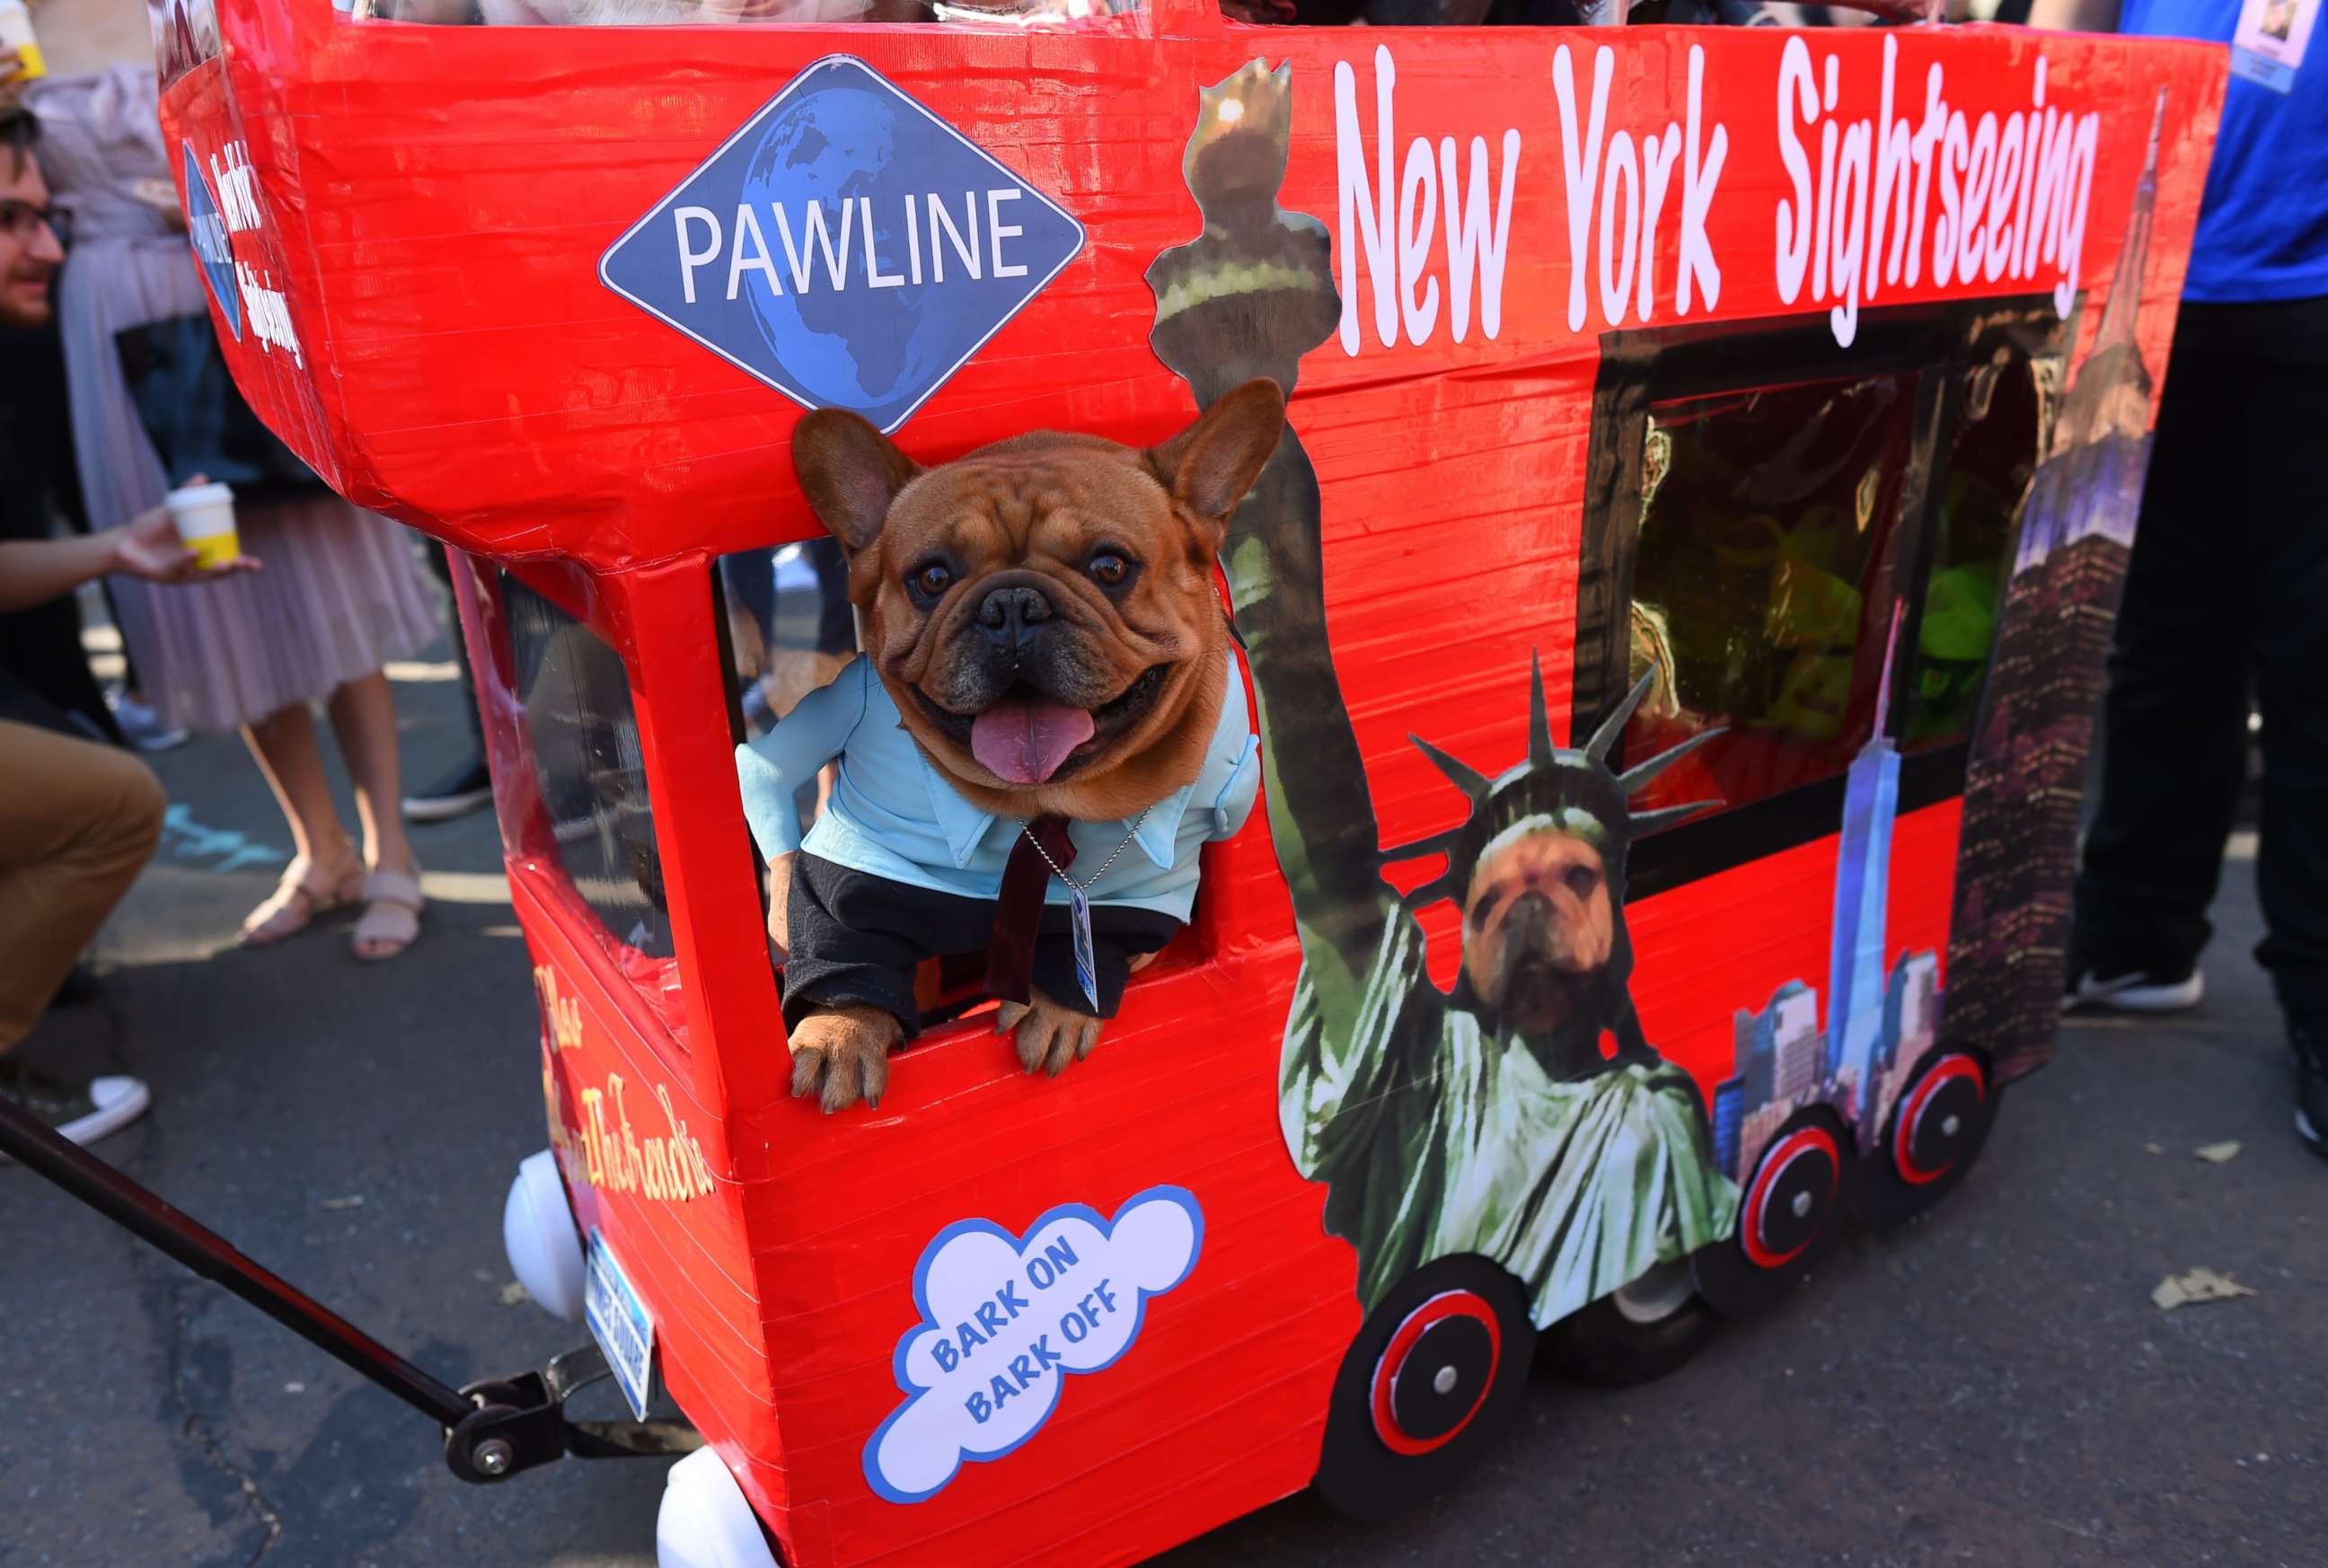 PHOTO: A dog in costume is seen during the 27th Annual Tompkins Square Halloween Dog Parade in Tompkins Square Park in New York, Oct. 21, 2017.